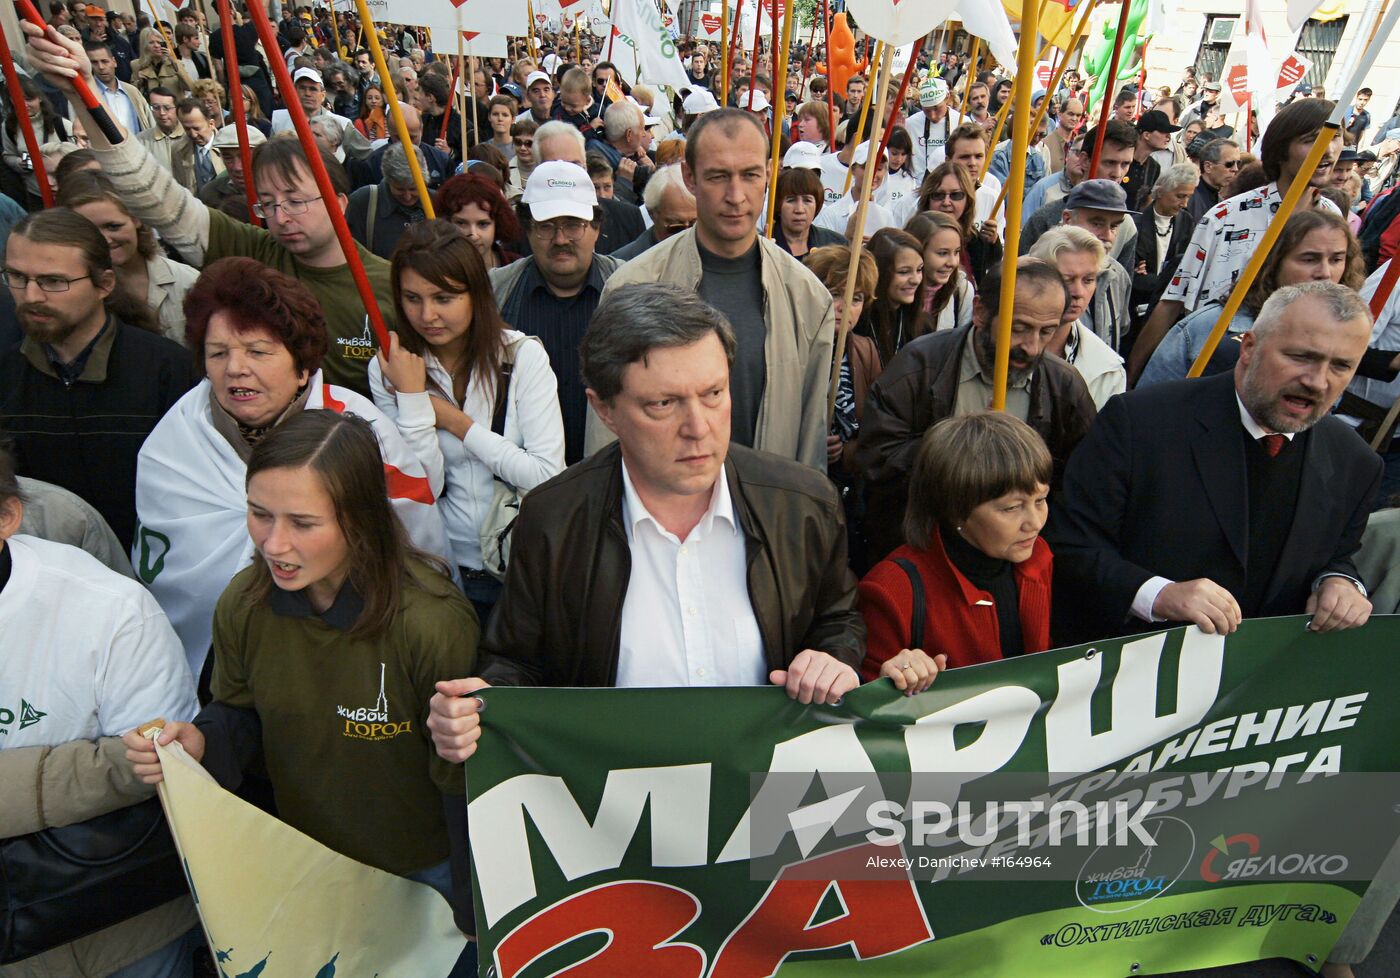 MARCH TO SAVE ST. PETERSBURG